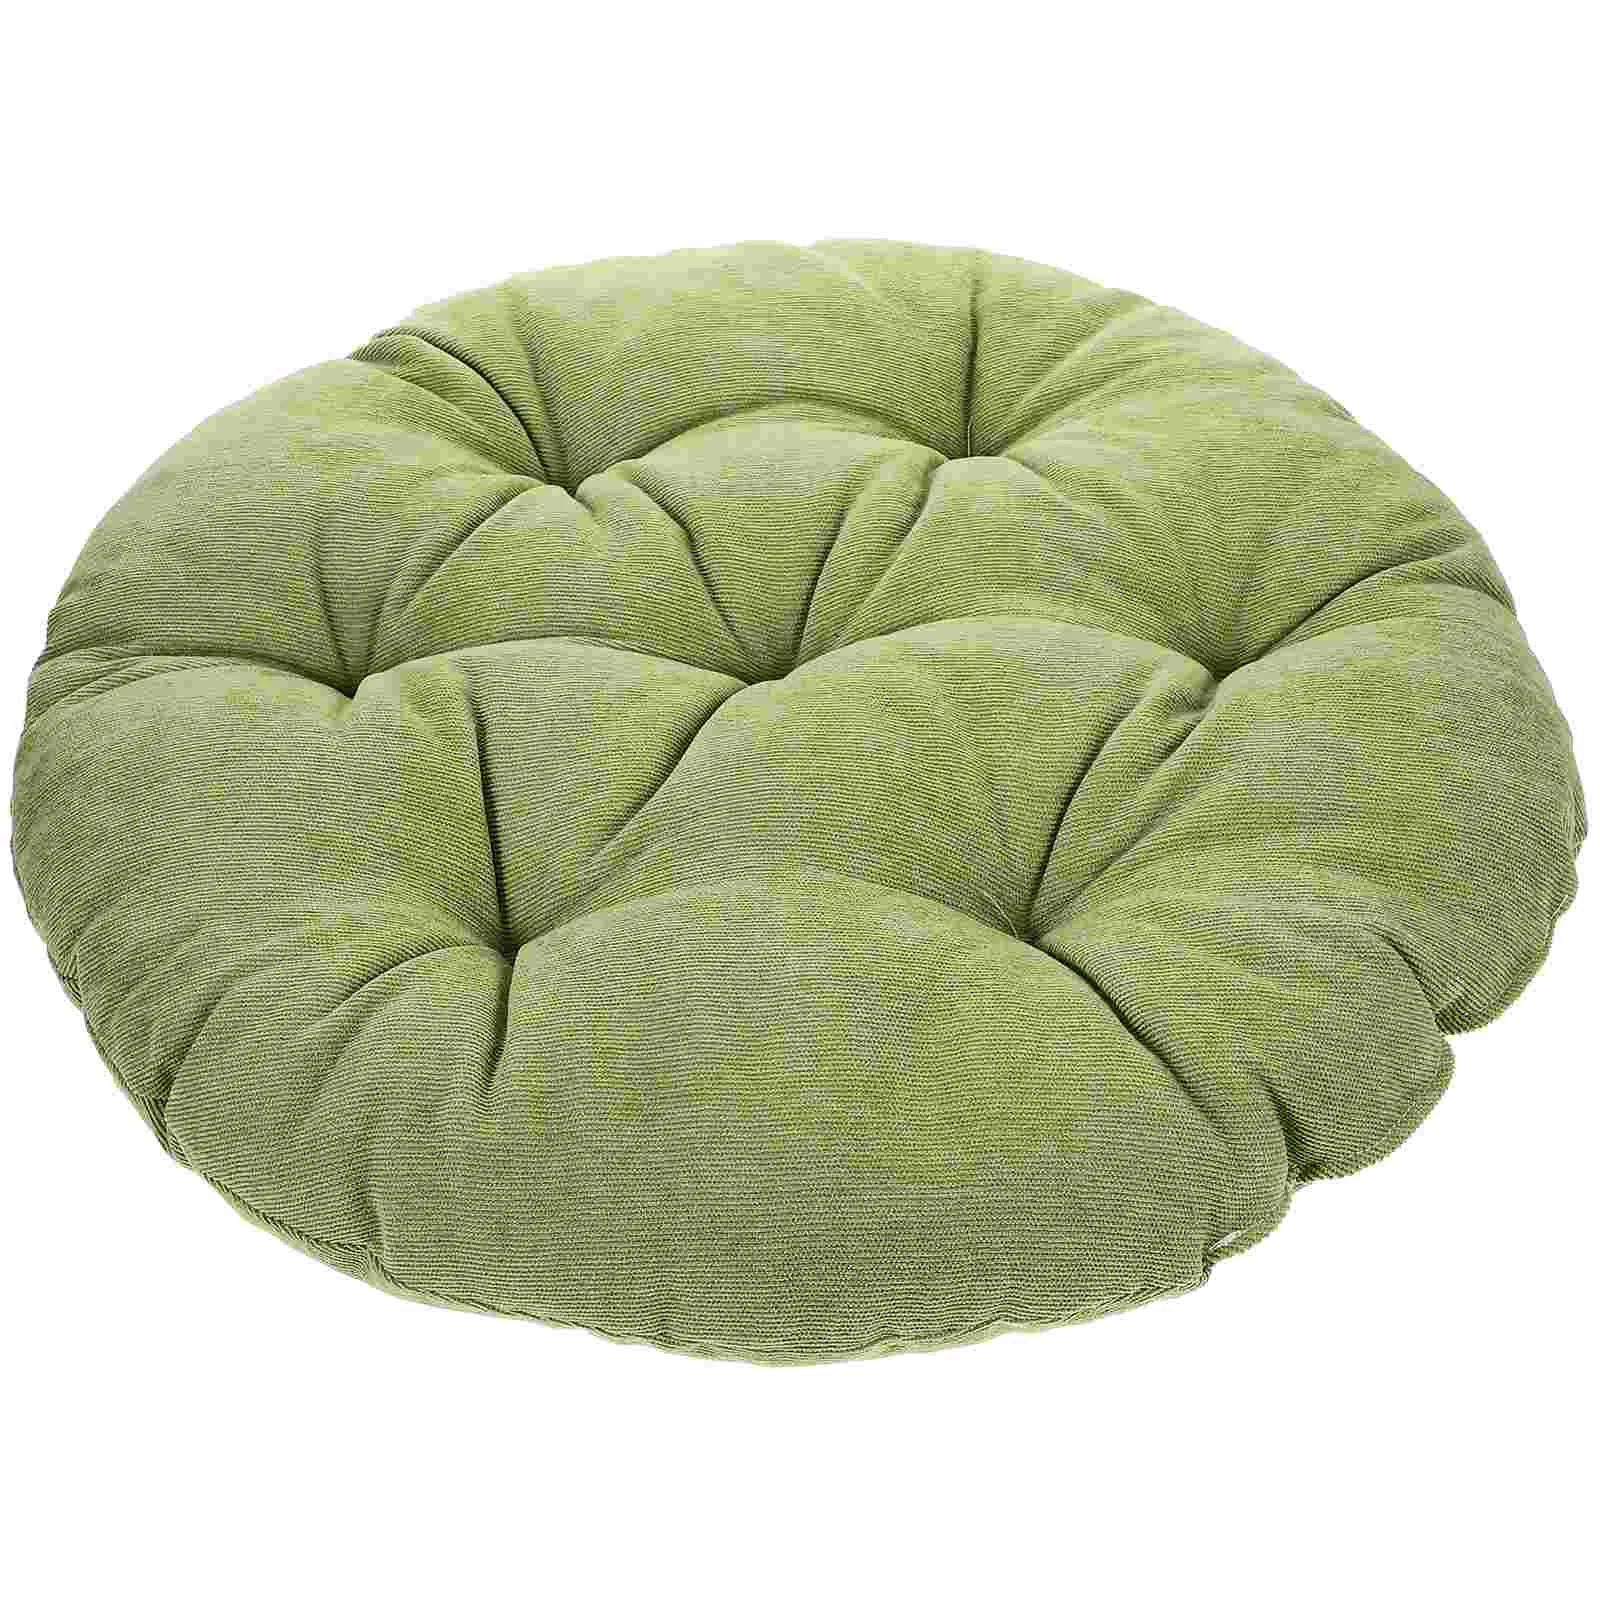 

Garden Mat Household Chair Cushion Comfortable Seats Pad Car Student Chairs Outdoor Cushions Dining Plush Home Office